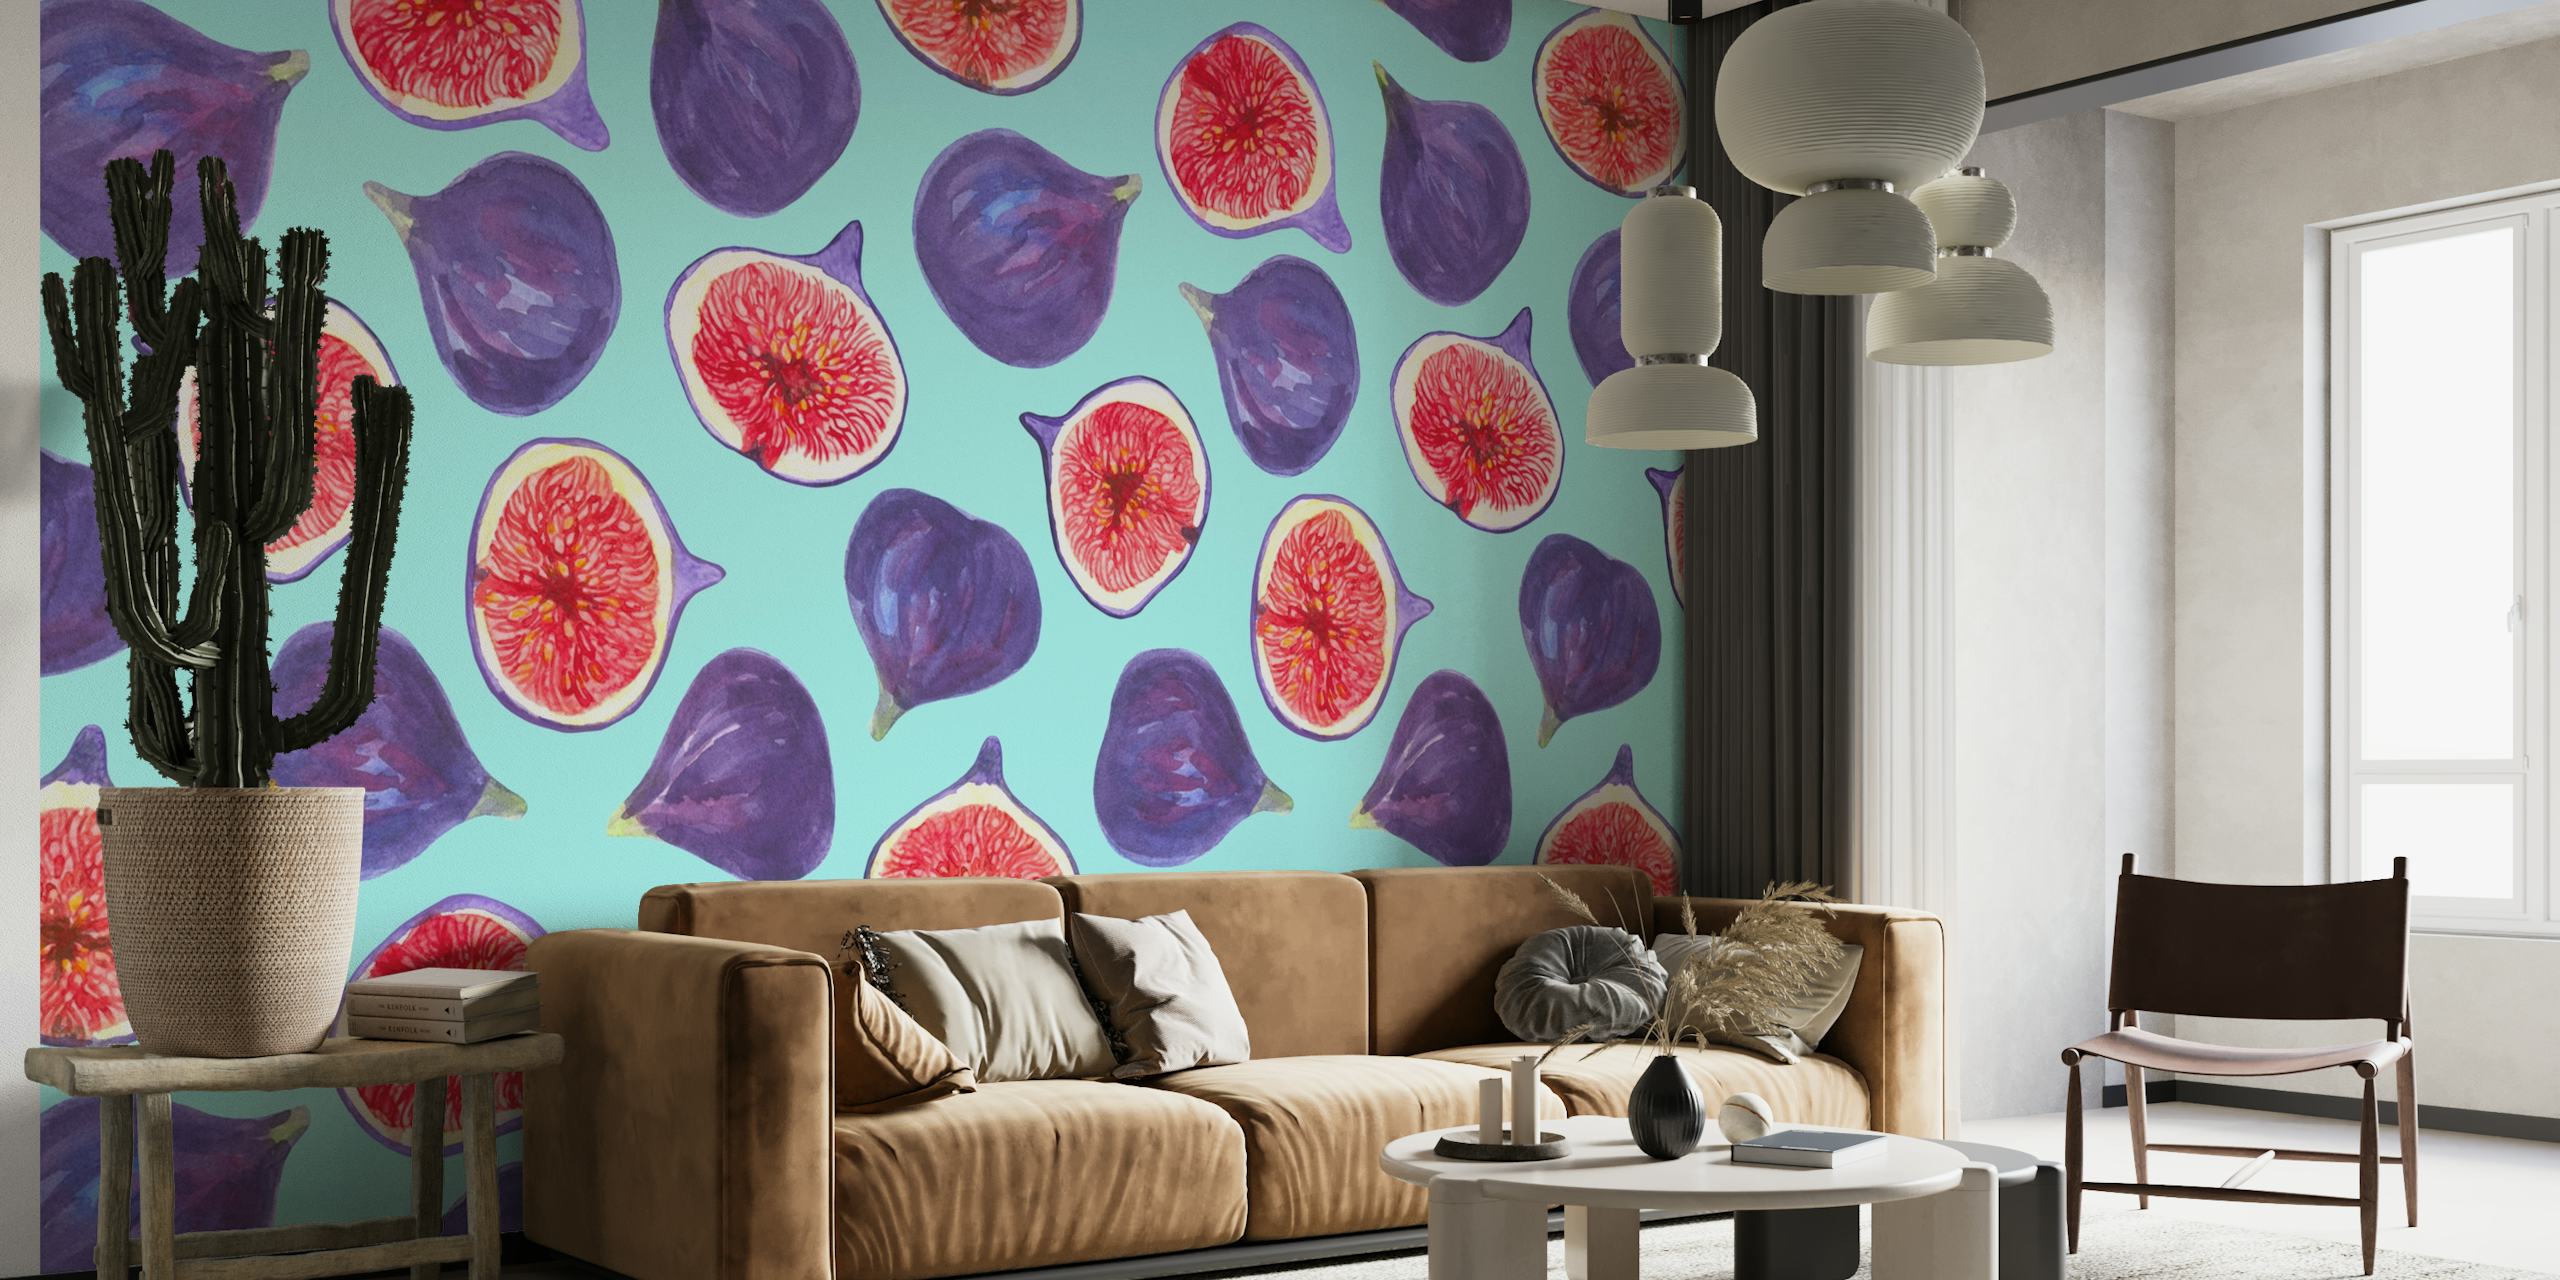 Figs and fig slices wallpaper